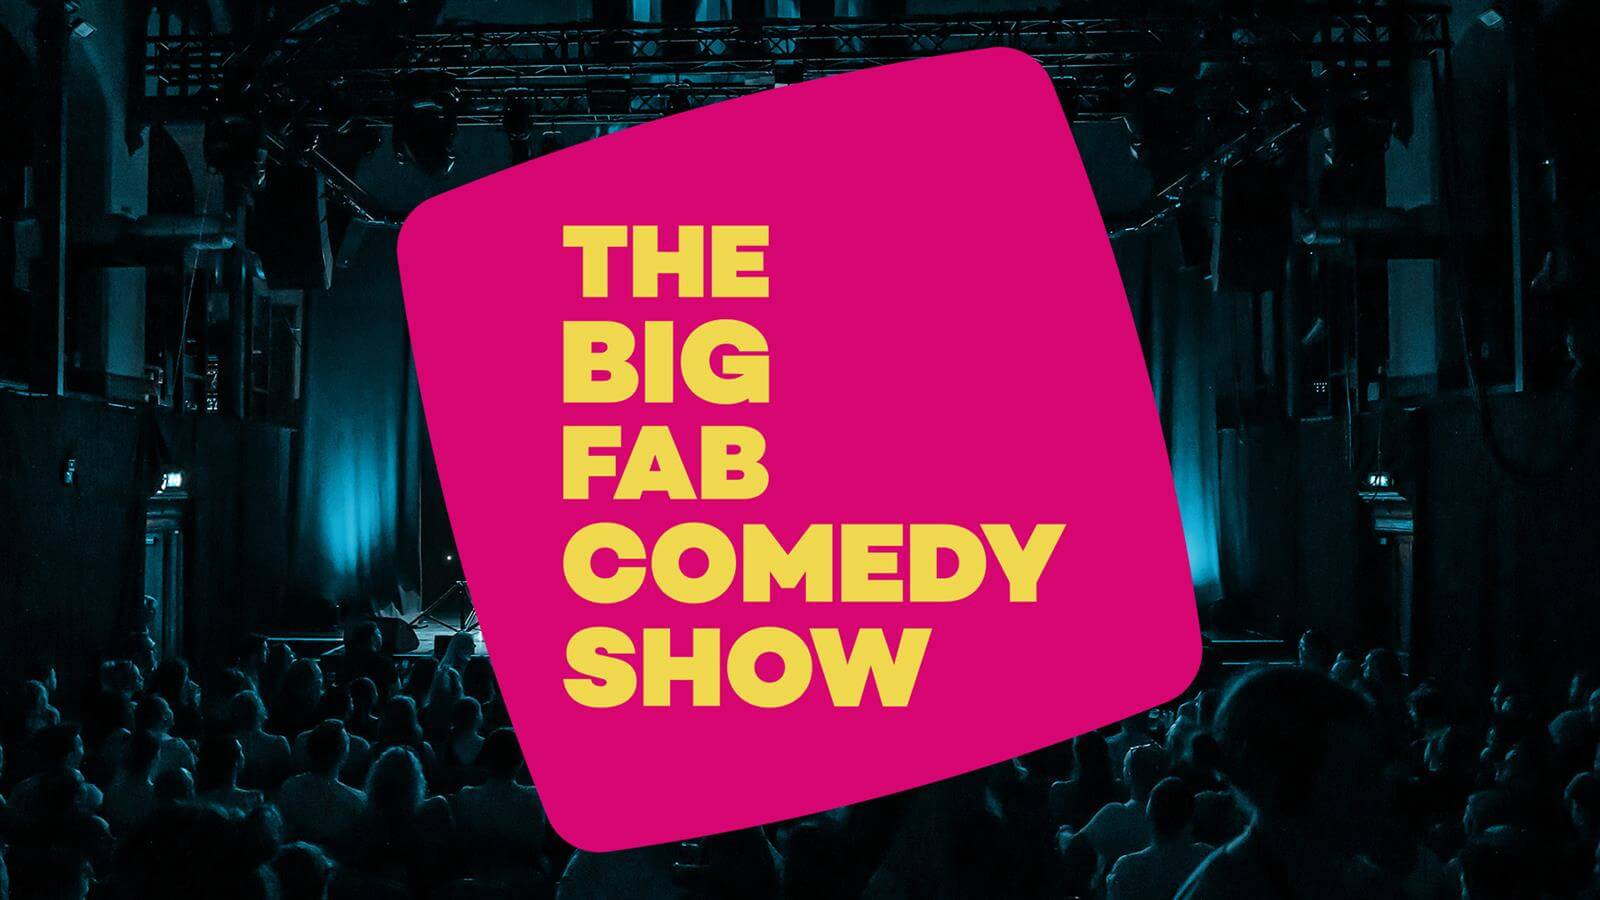 Black background with the title The Big Fab Comedy Show in yellow font on a pink cubes shape background.